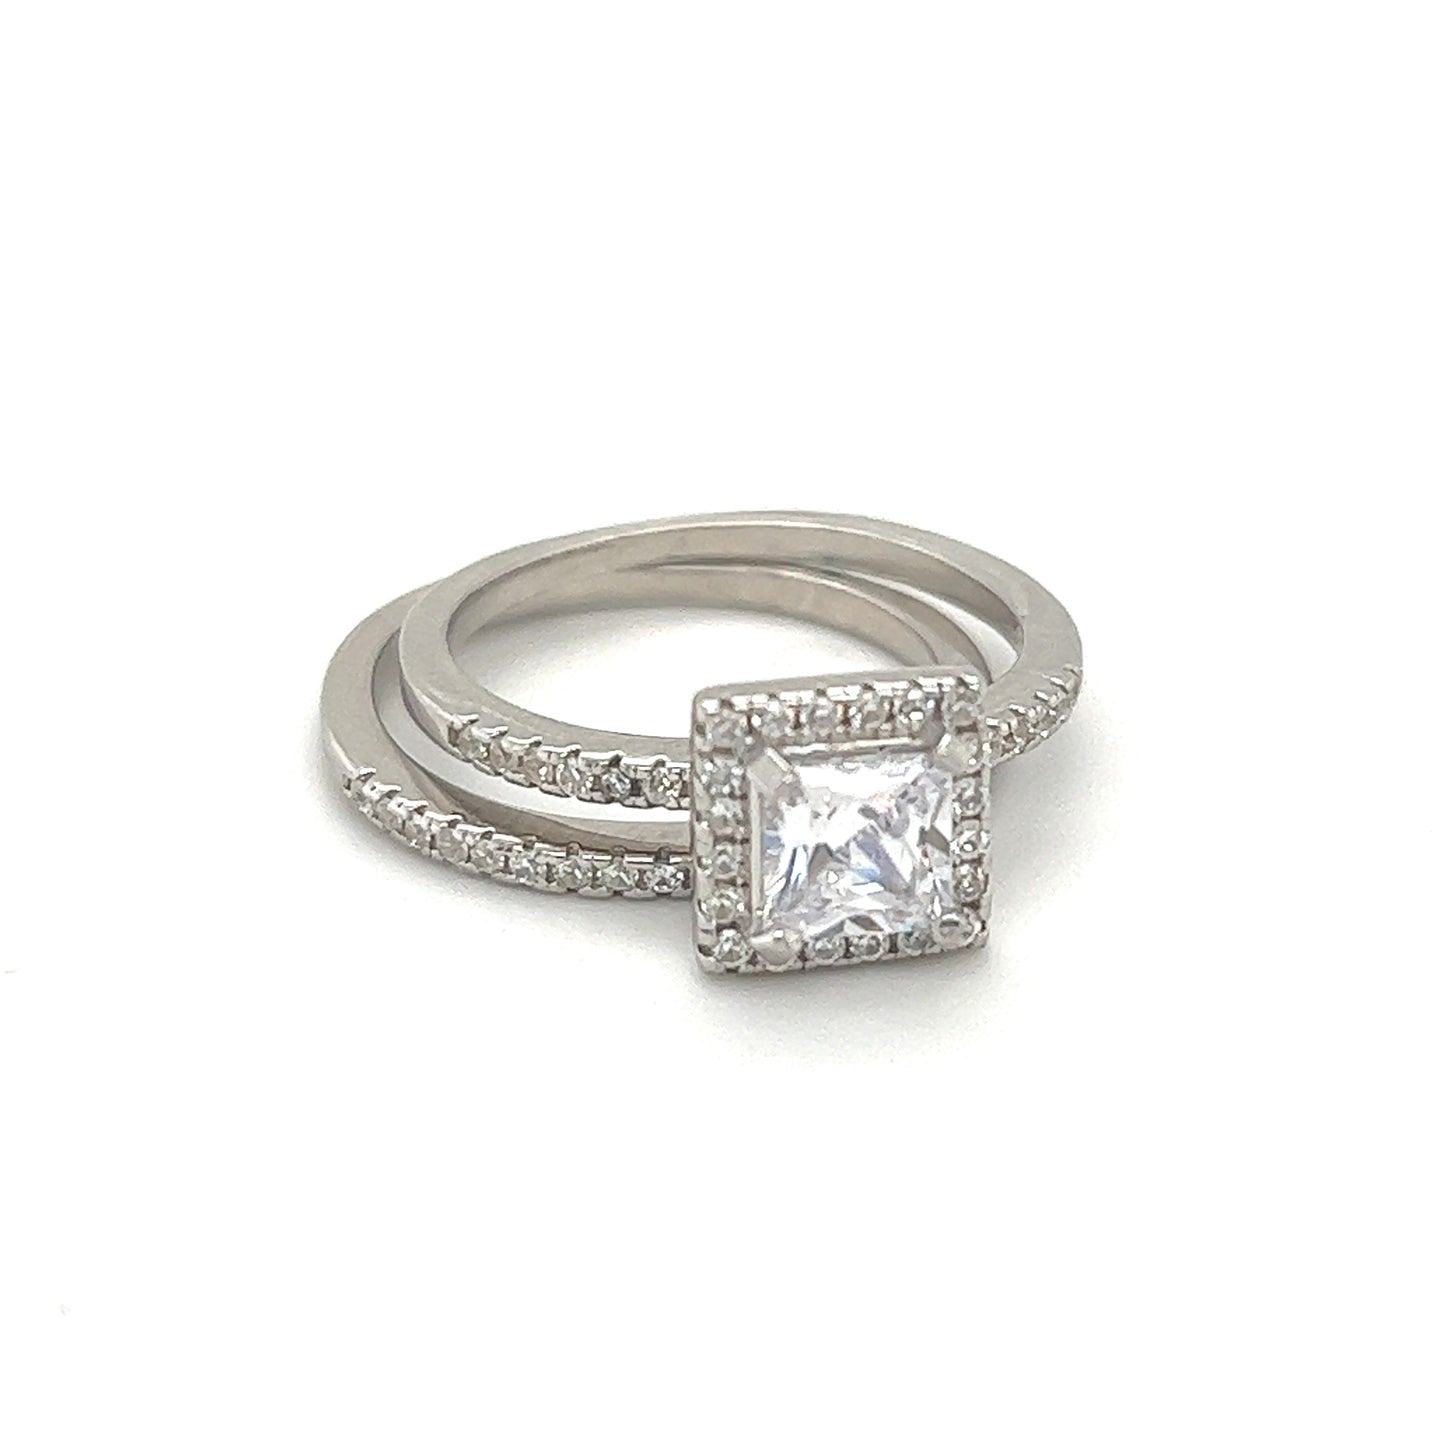 An elegant Princess Cut Cubic Zirconia Engagement Ring set in sterling silver.